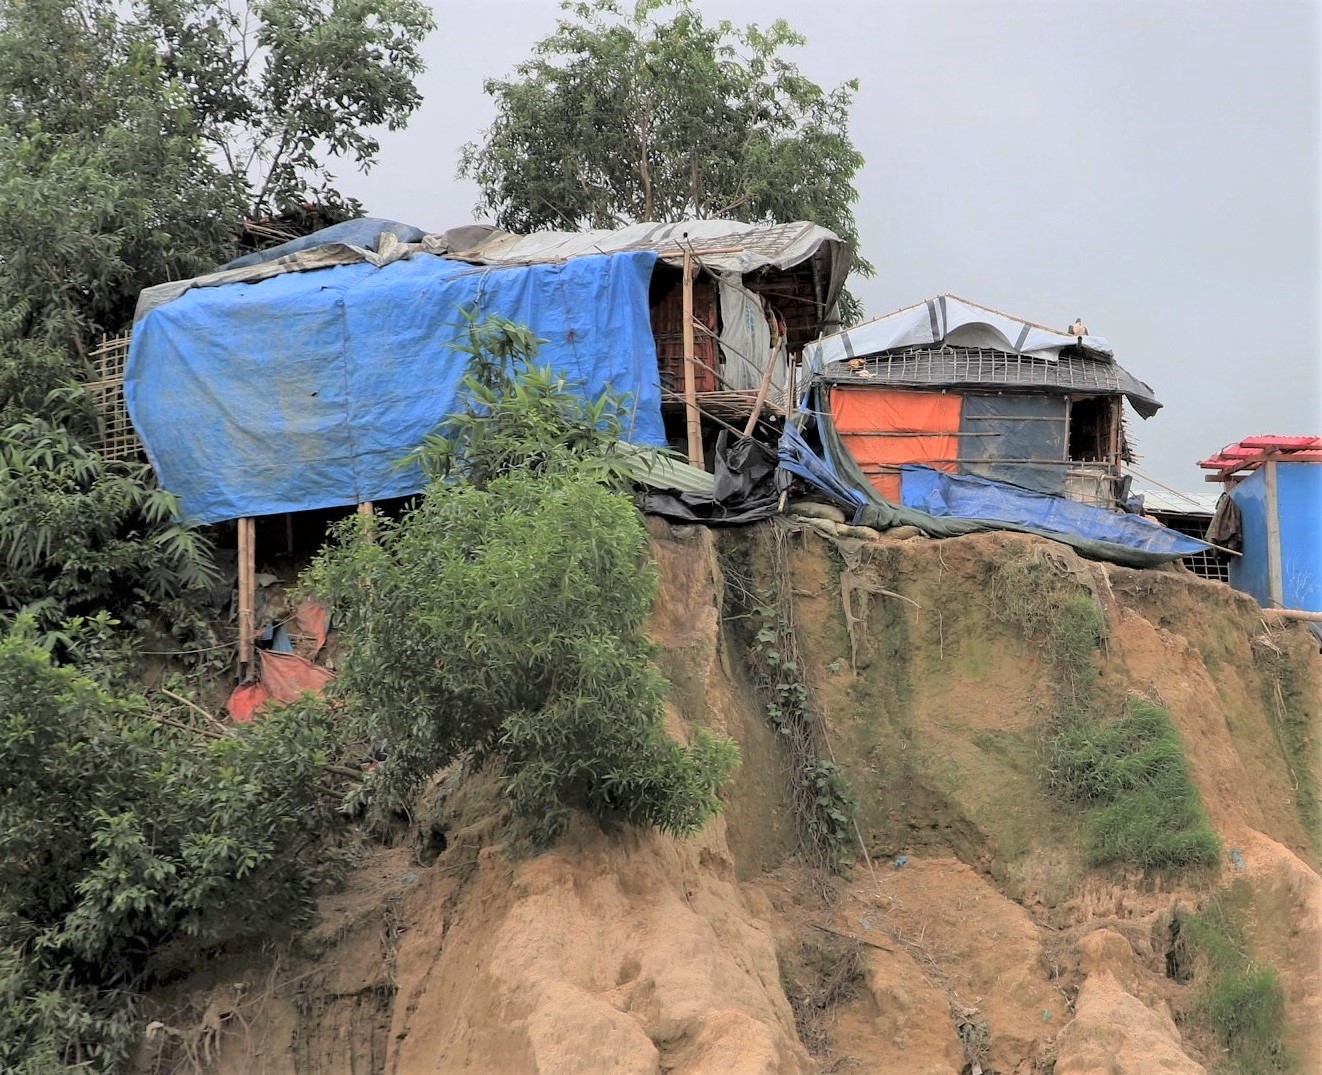 Image of a refugee campsite in Bangladesh.